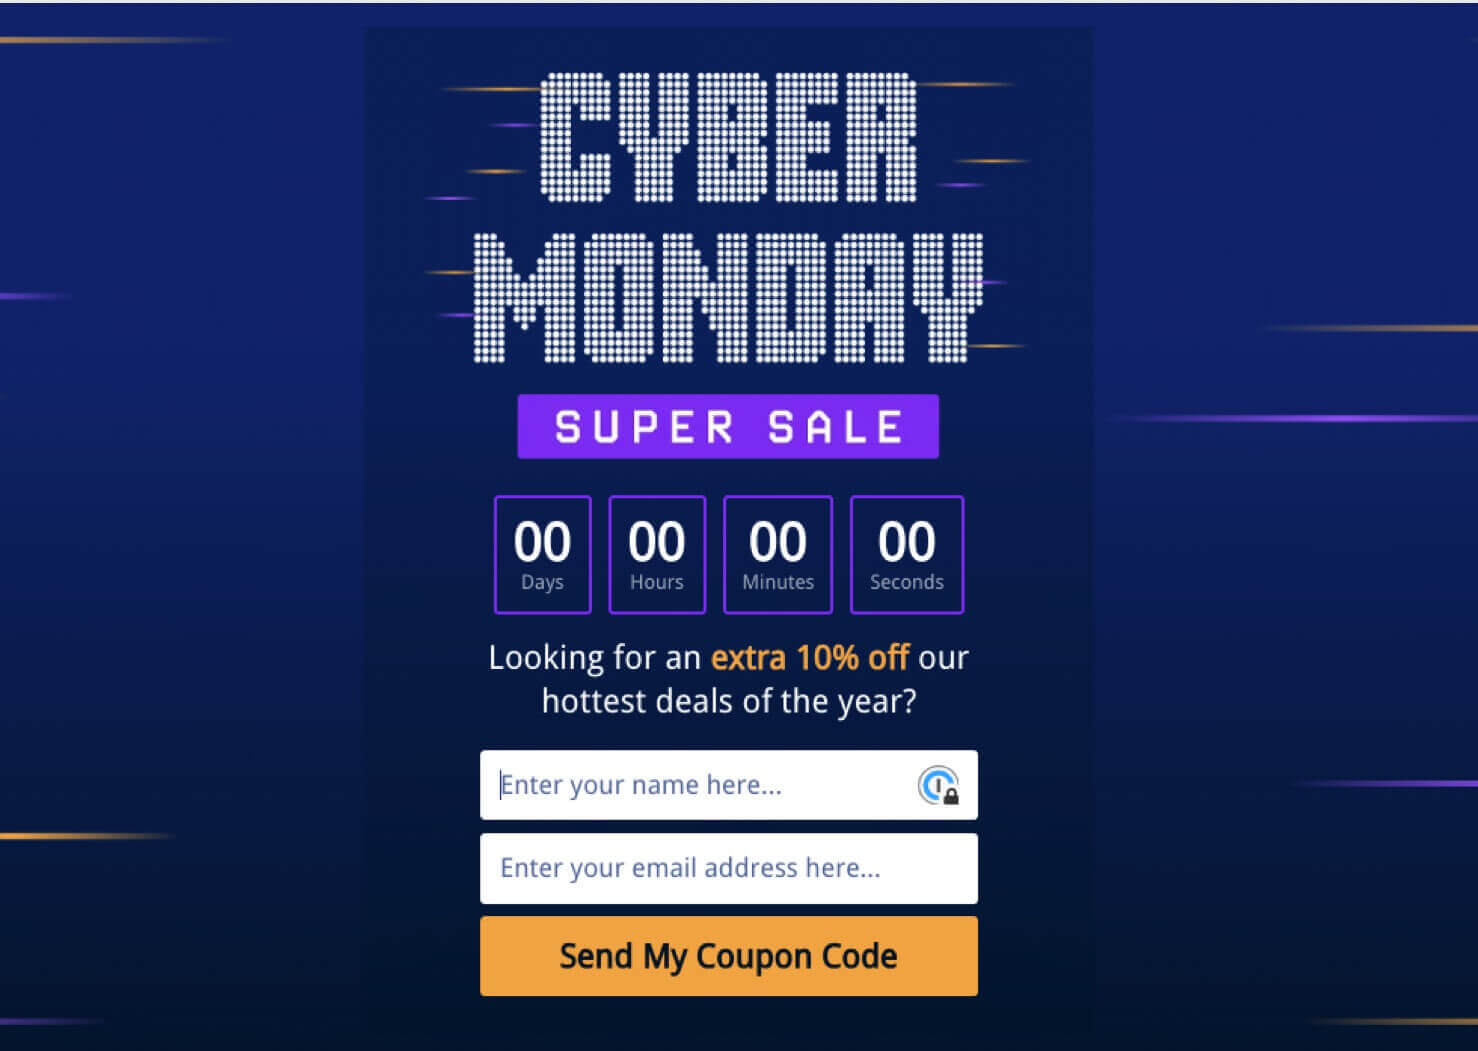 Cyber Monday Popup template from OptinMonster. It says "CYBER MONDAY Super Sale." Then there's a countdown timer, a coupon offer, and an email signup form.